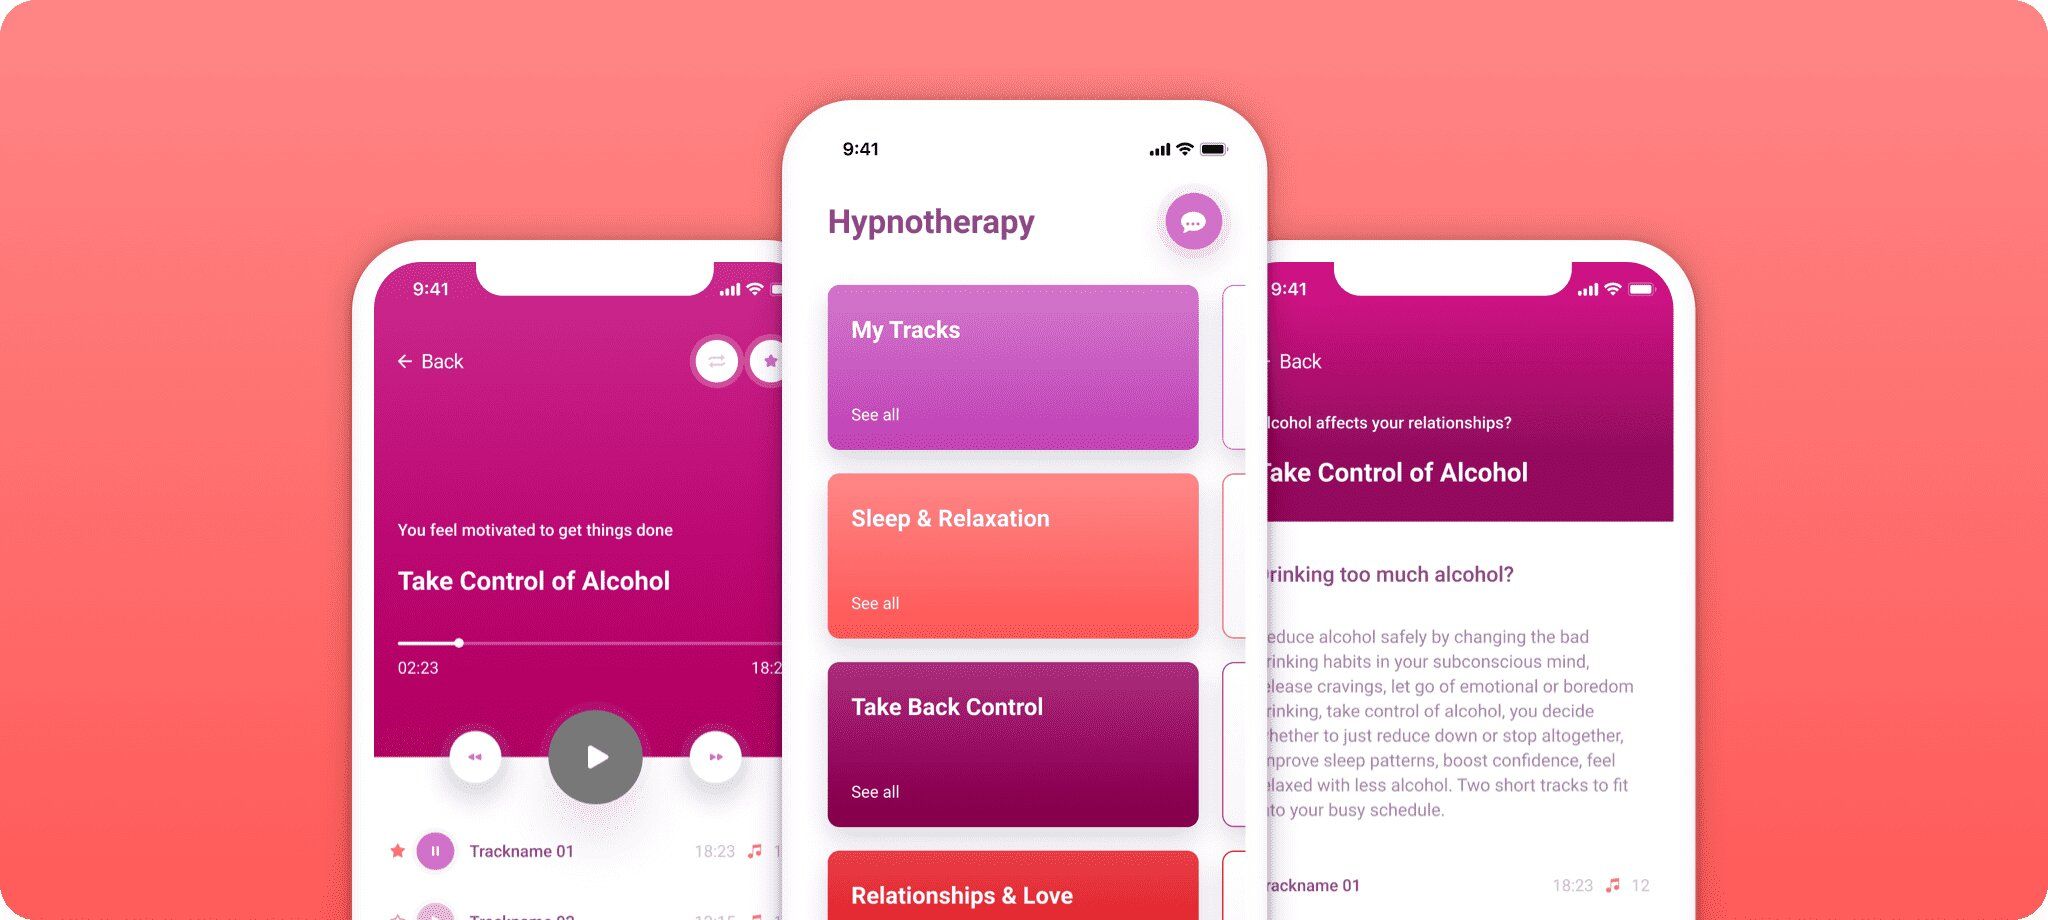 We have an expertise in healthcare app development for mental care (*image by [Stormotion](https://stormotion.io/){ target="_blank" .default-md}*)